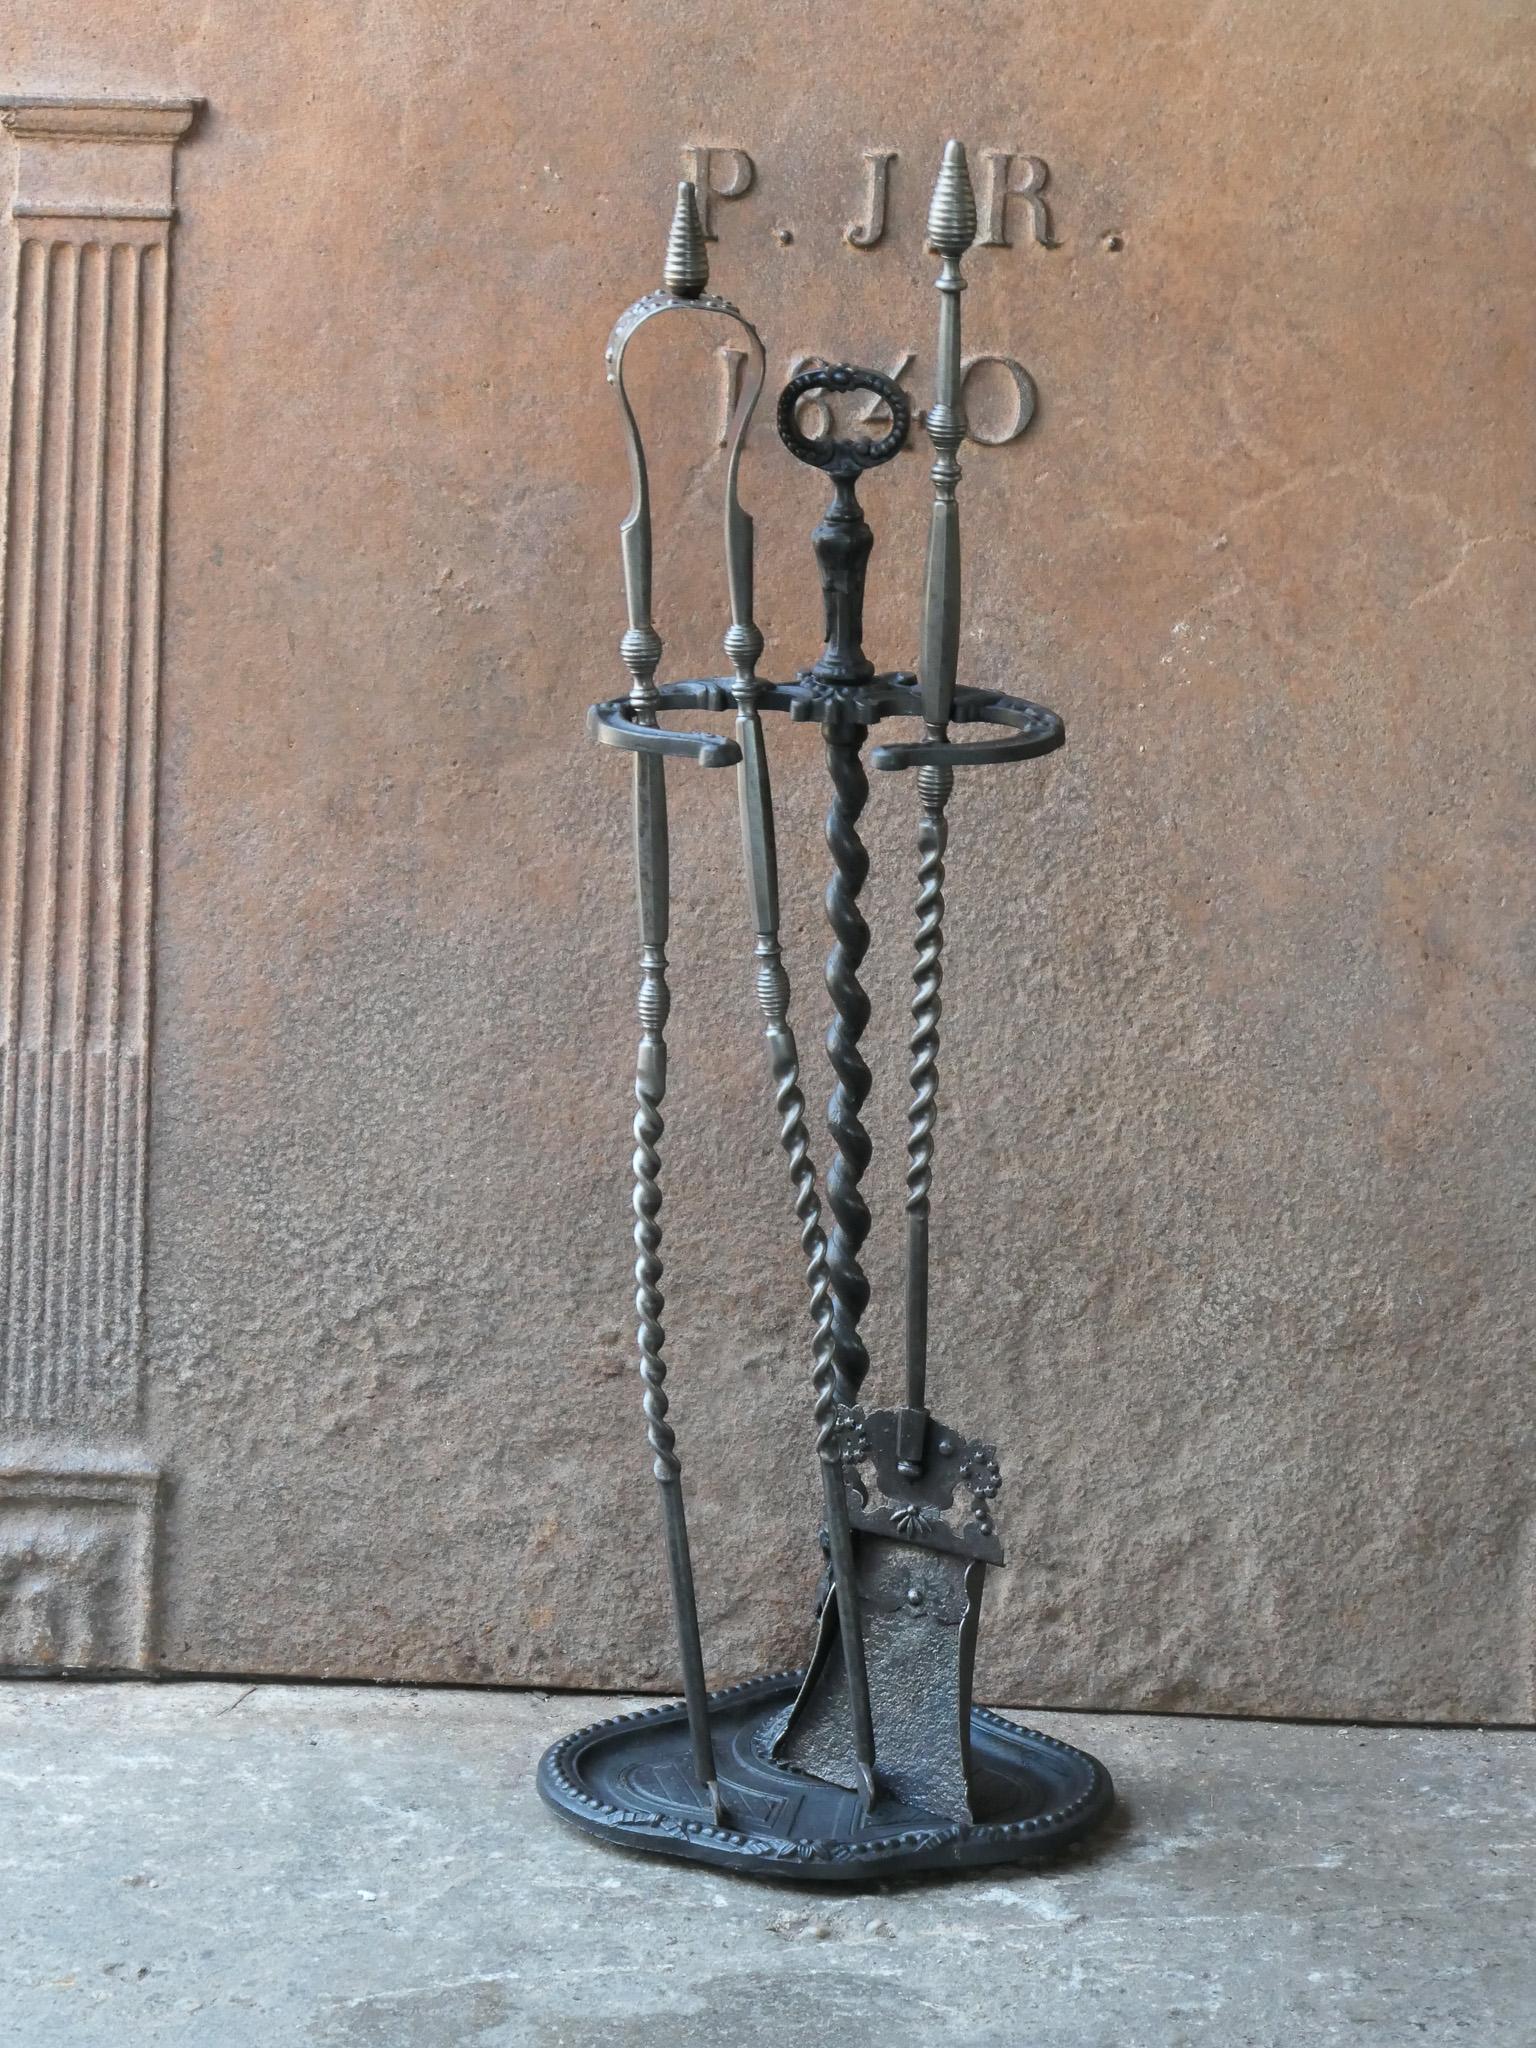 19th century French fireplace tool set. The tool set consists of tongs, shovel, and a stand. The exceptionally decorated tools are made of wrought iron and the stand of cast iron. The set is in a good condition and fit for use in the fireplace.